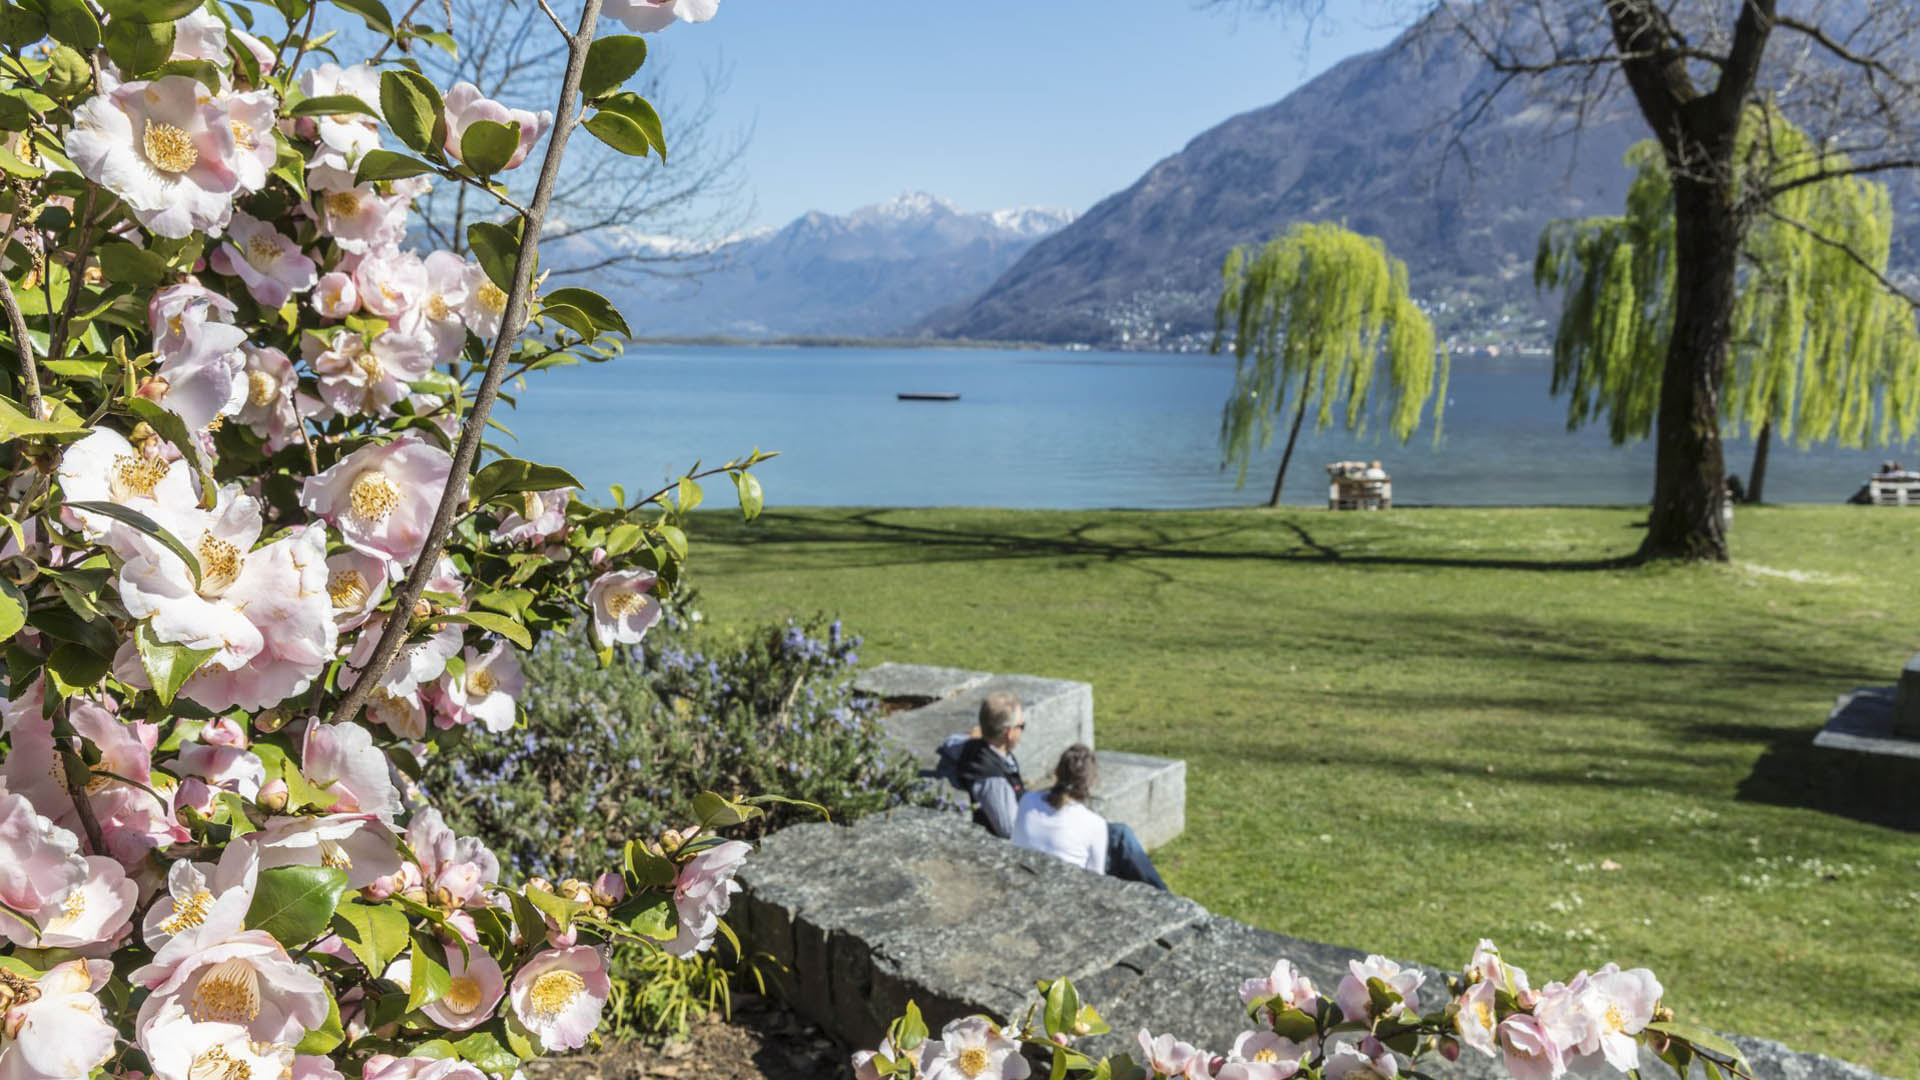 Locarno, the City of Flowers